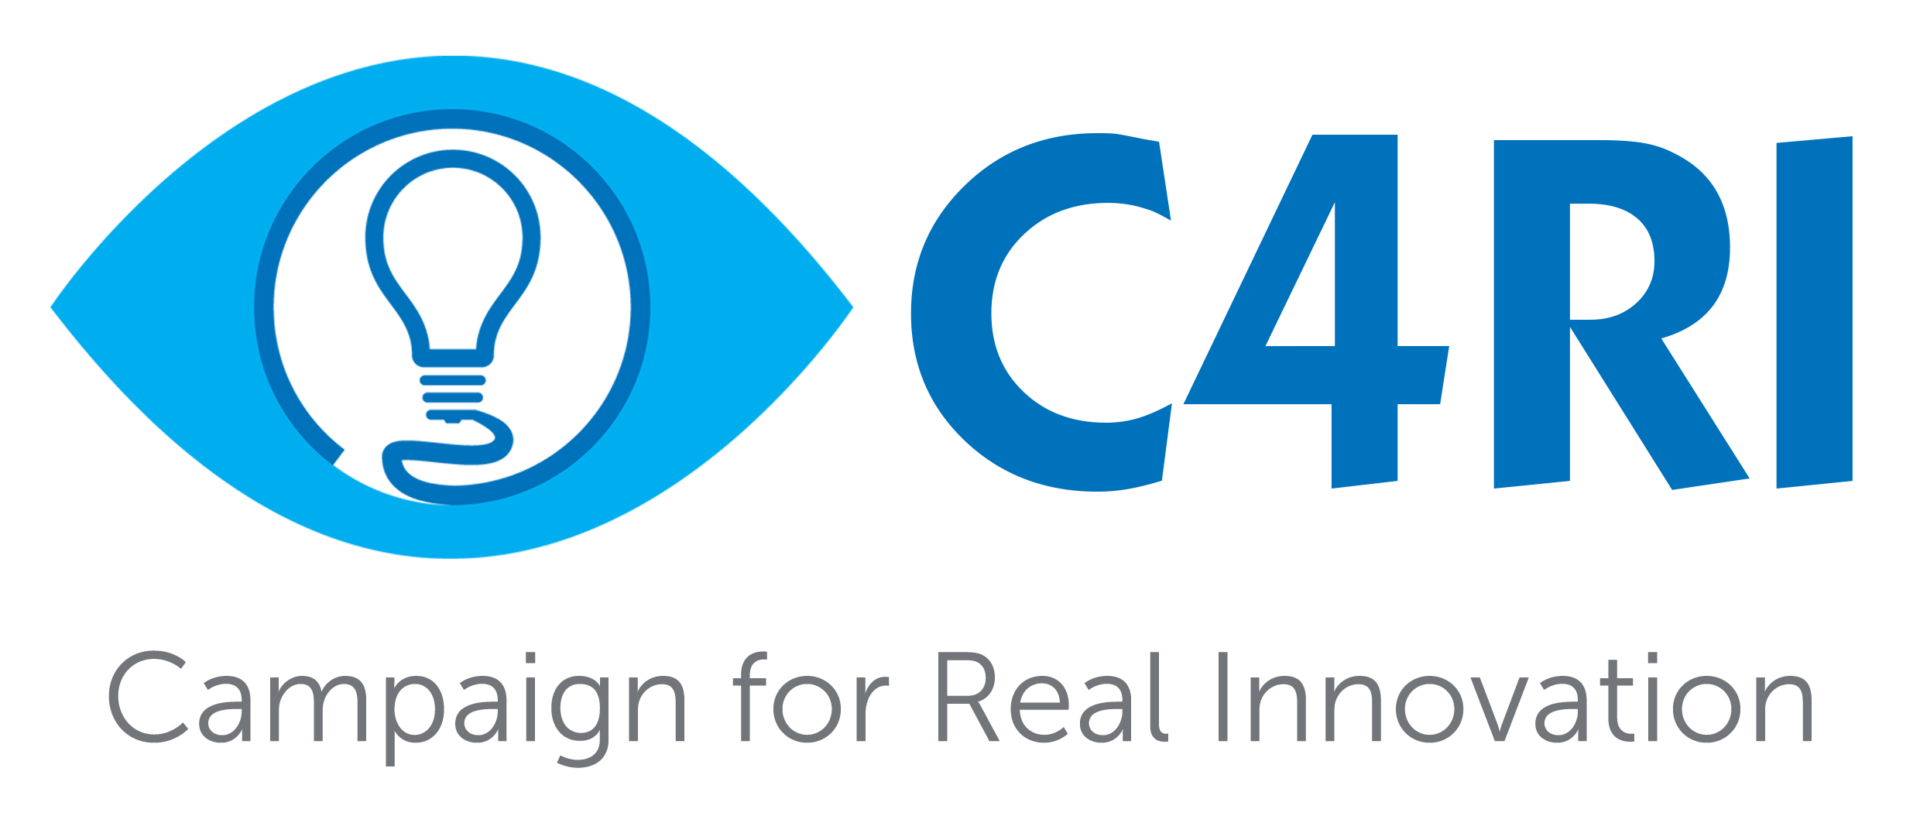 The Campaign for Real Innovation - C4RI